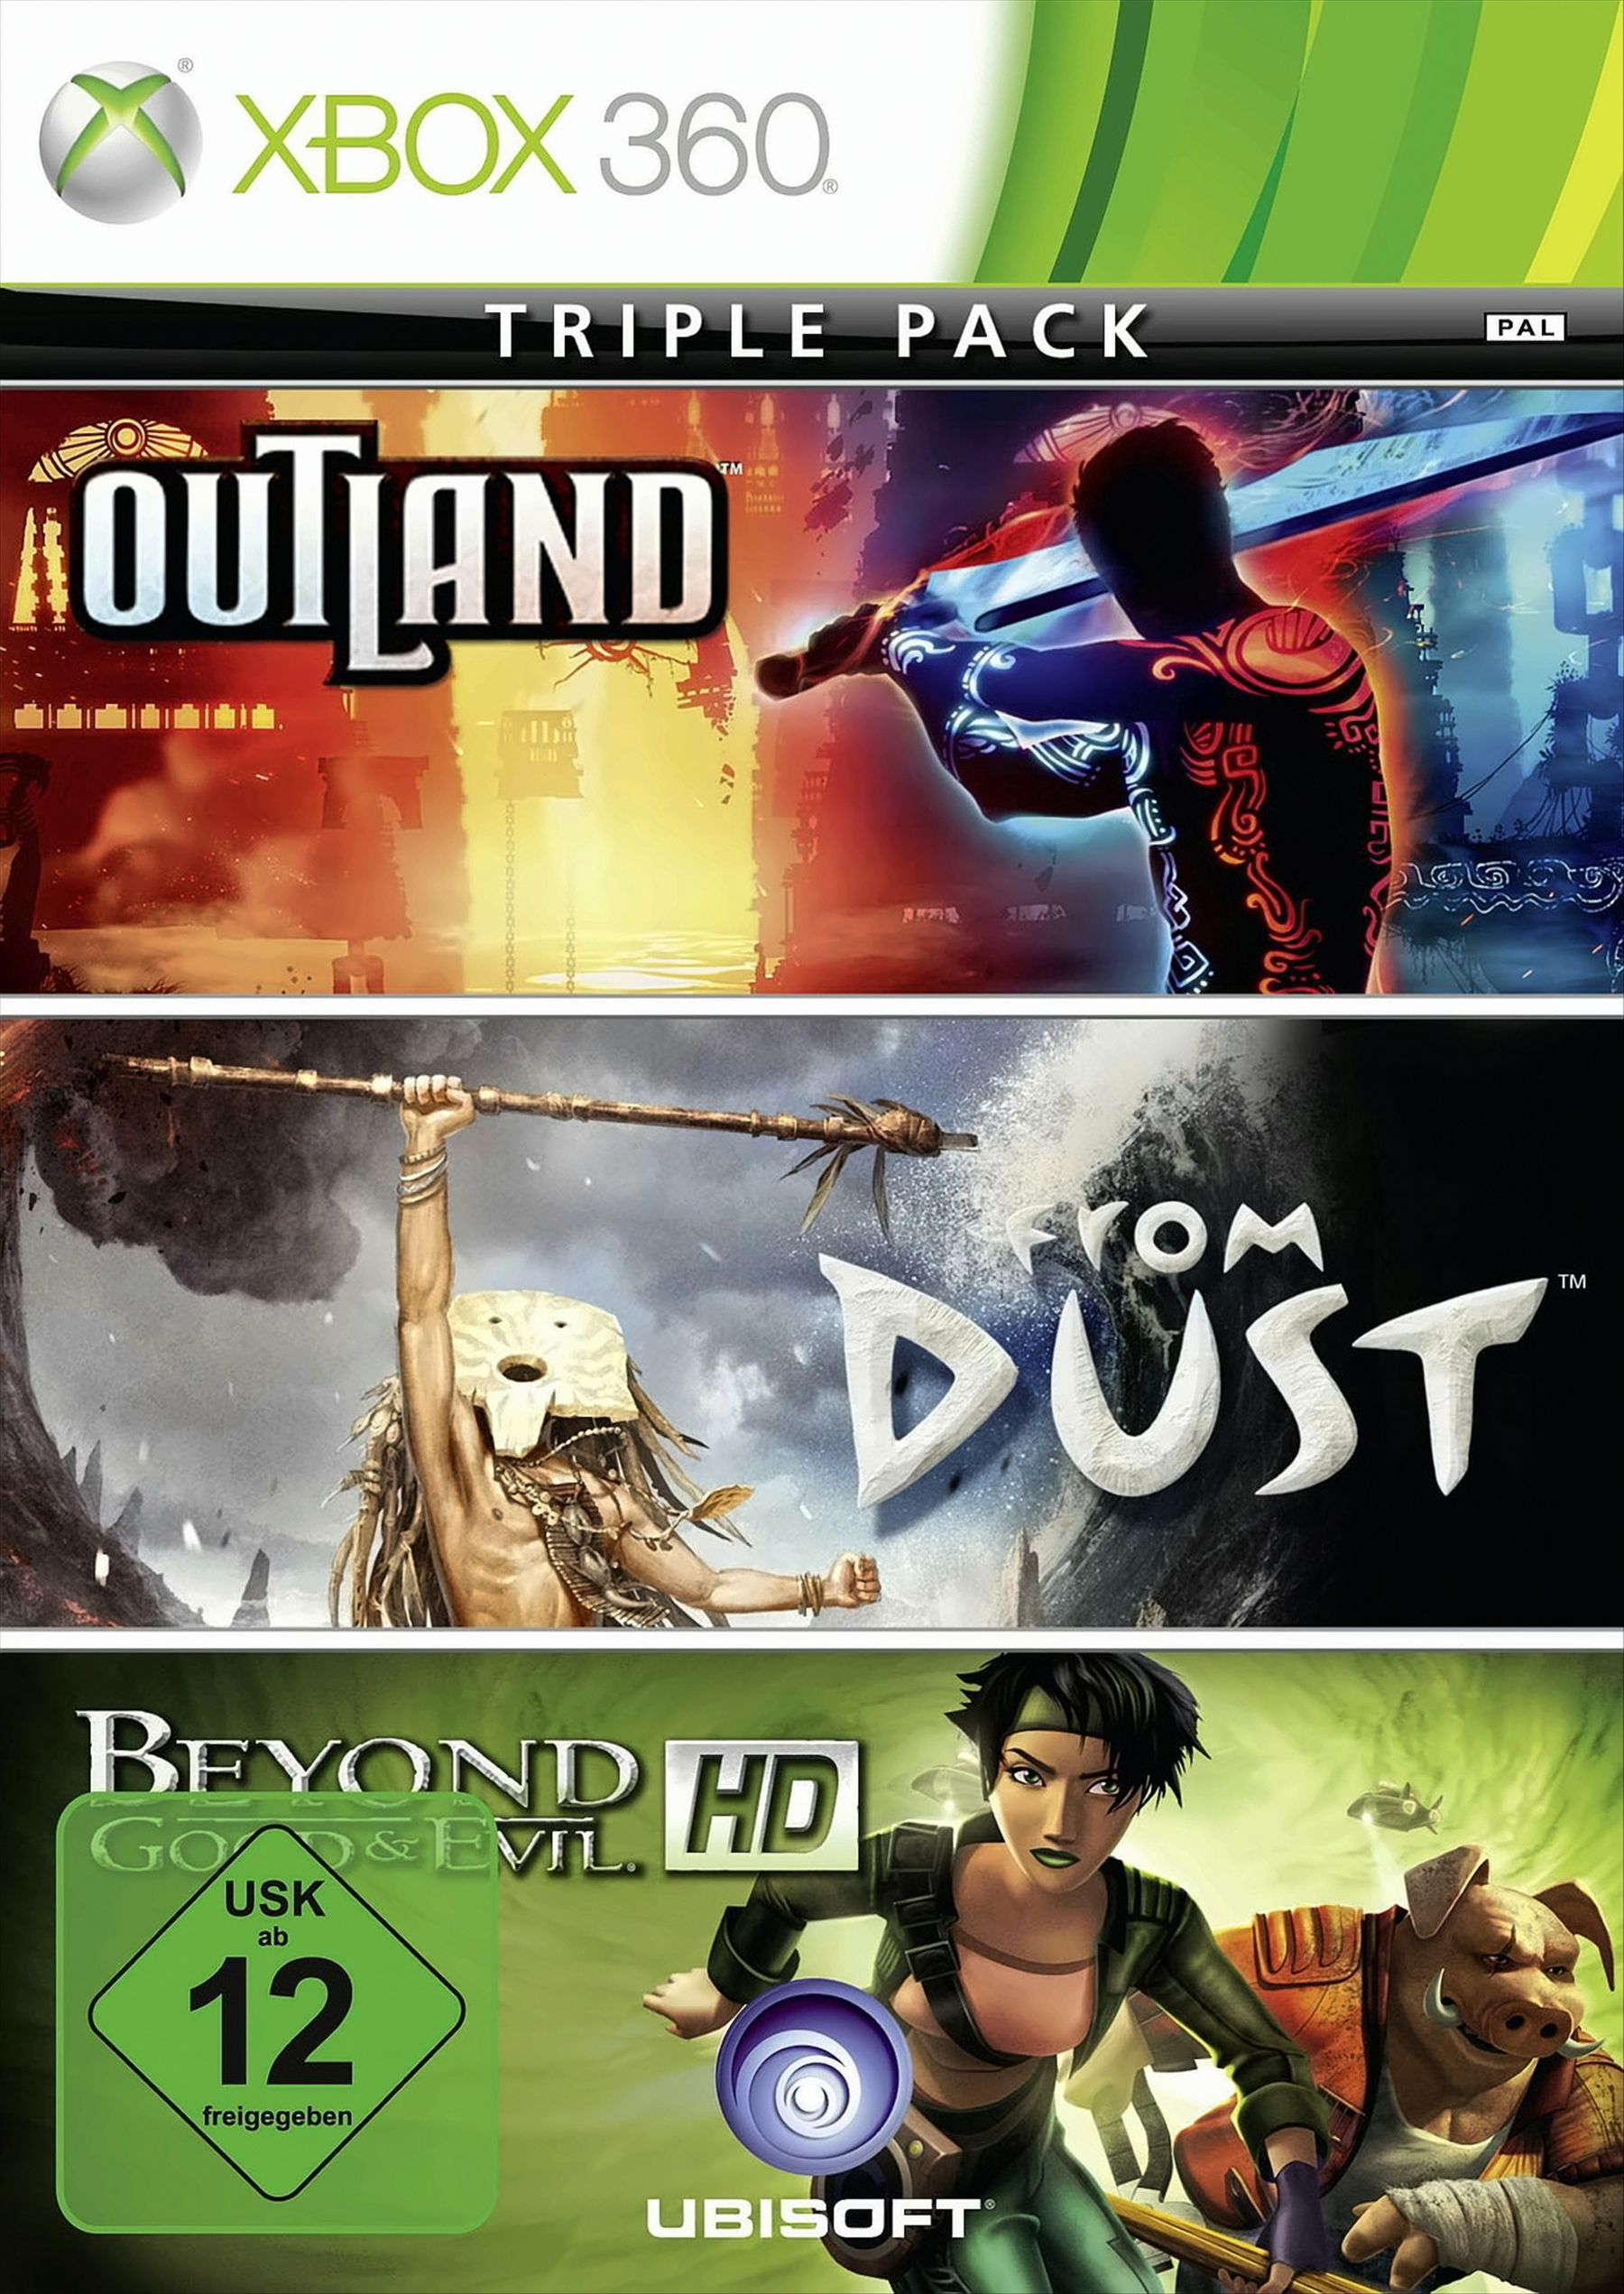 / / From Good Evil Pack: Outland HD Dust Beyond [Xbox Triple 360] - Xbox & 360